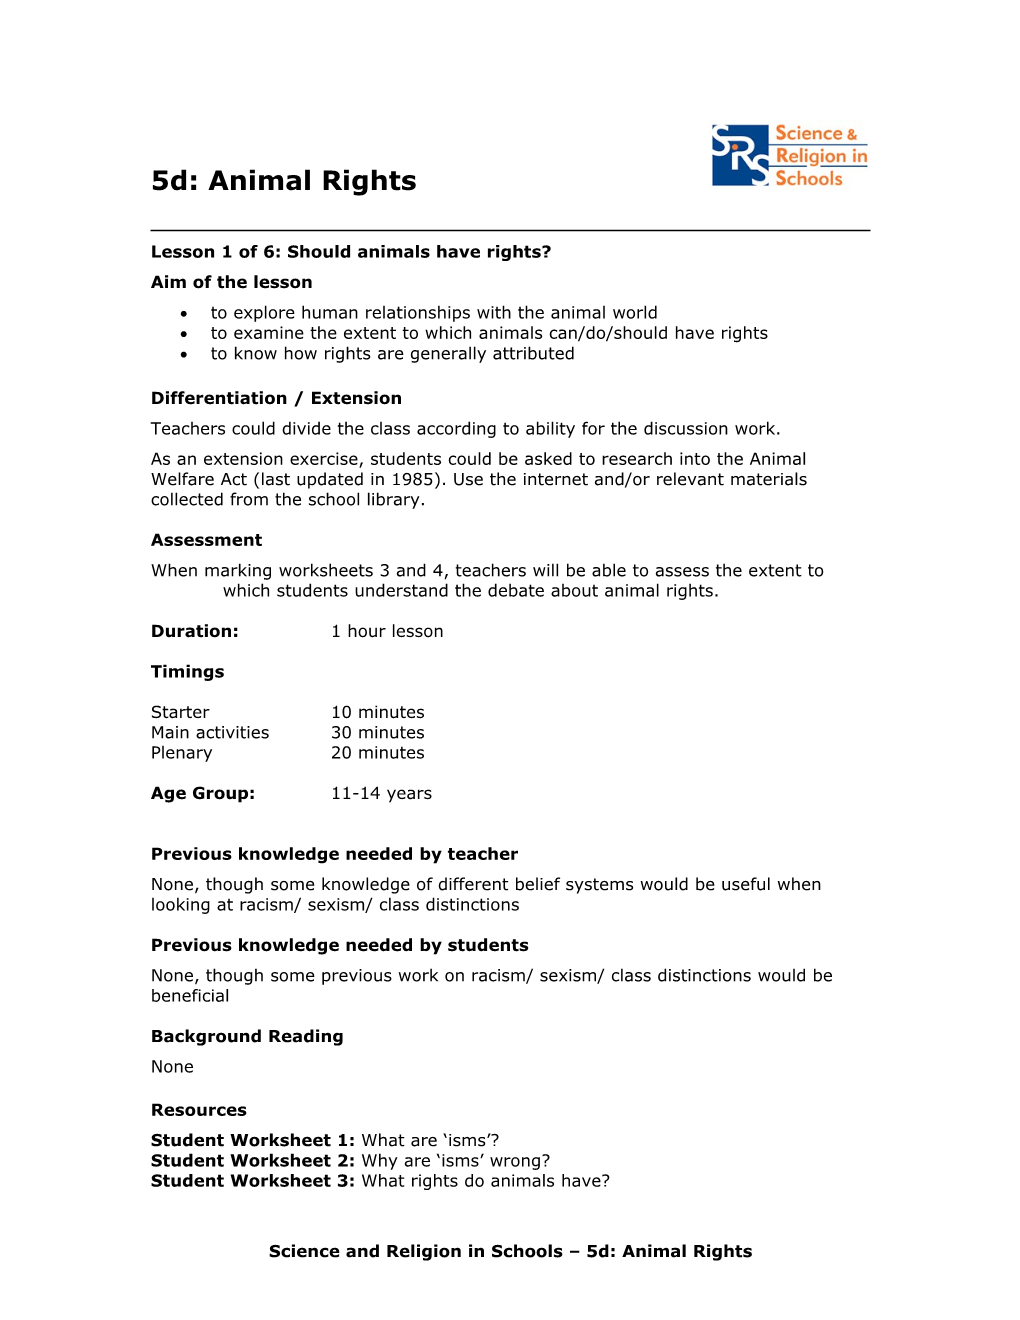 Lesson 1 of 6: Should Animals Have Rights?